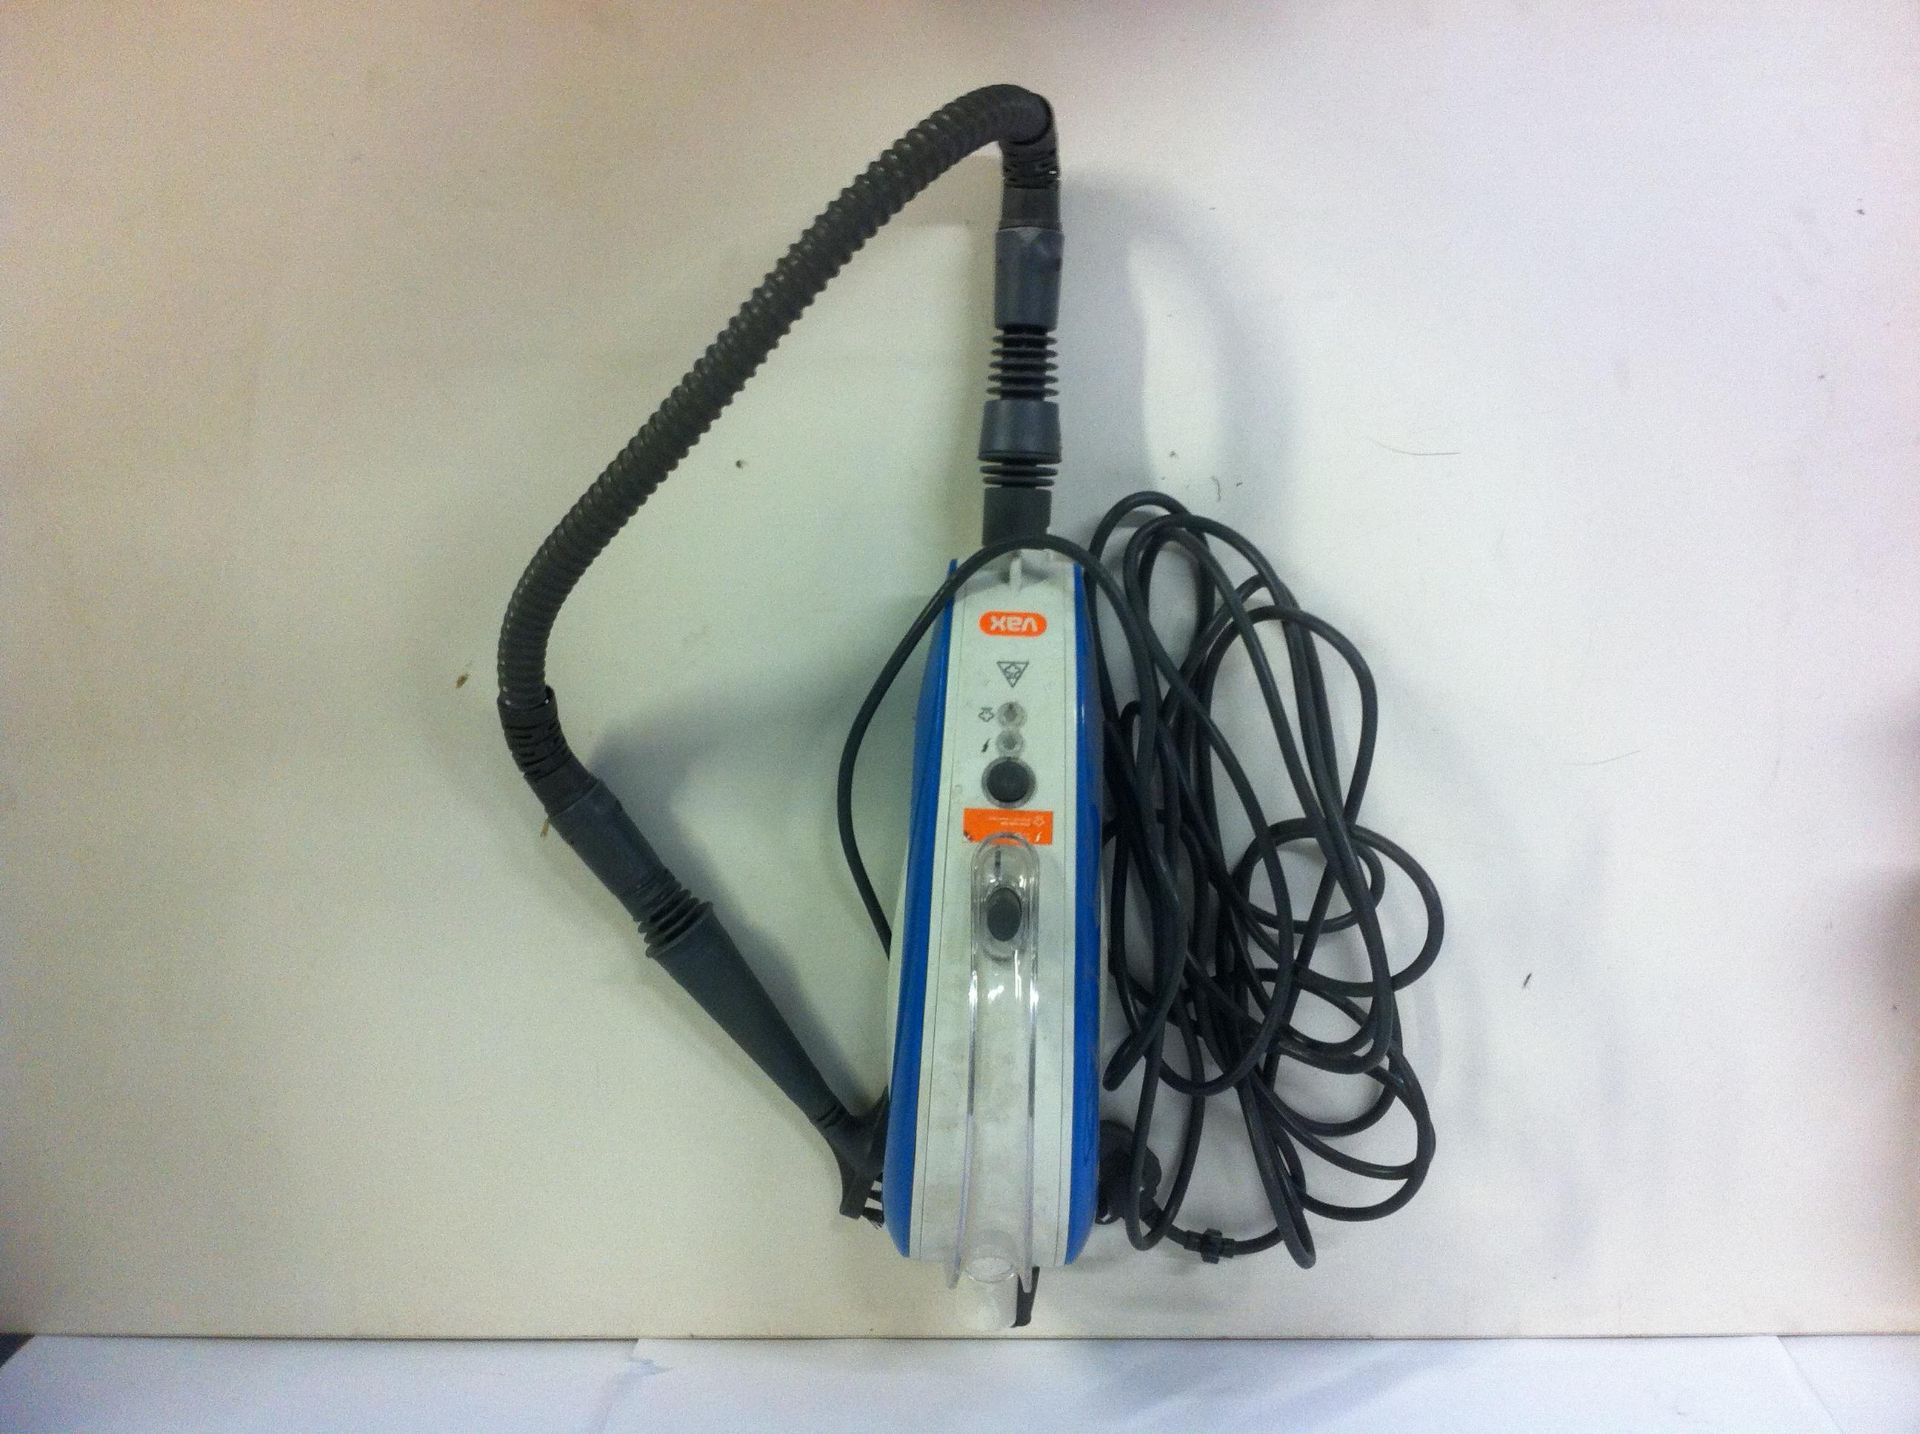 Vax steam cleaner with attachments - Image 2 of 5